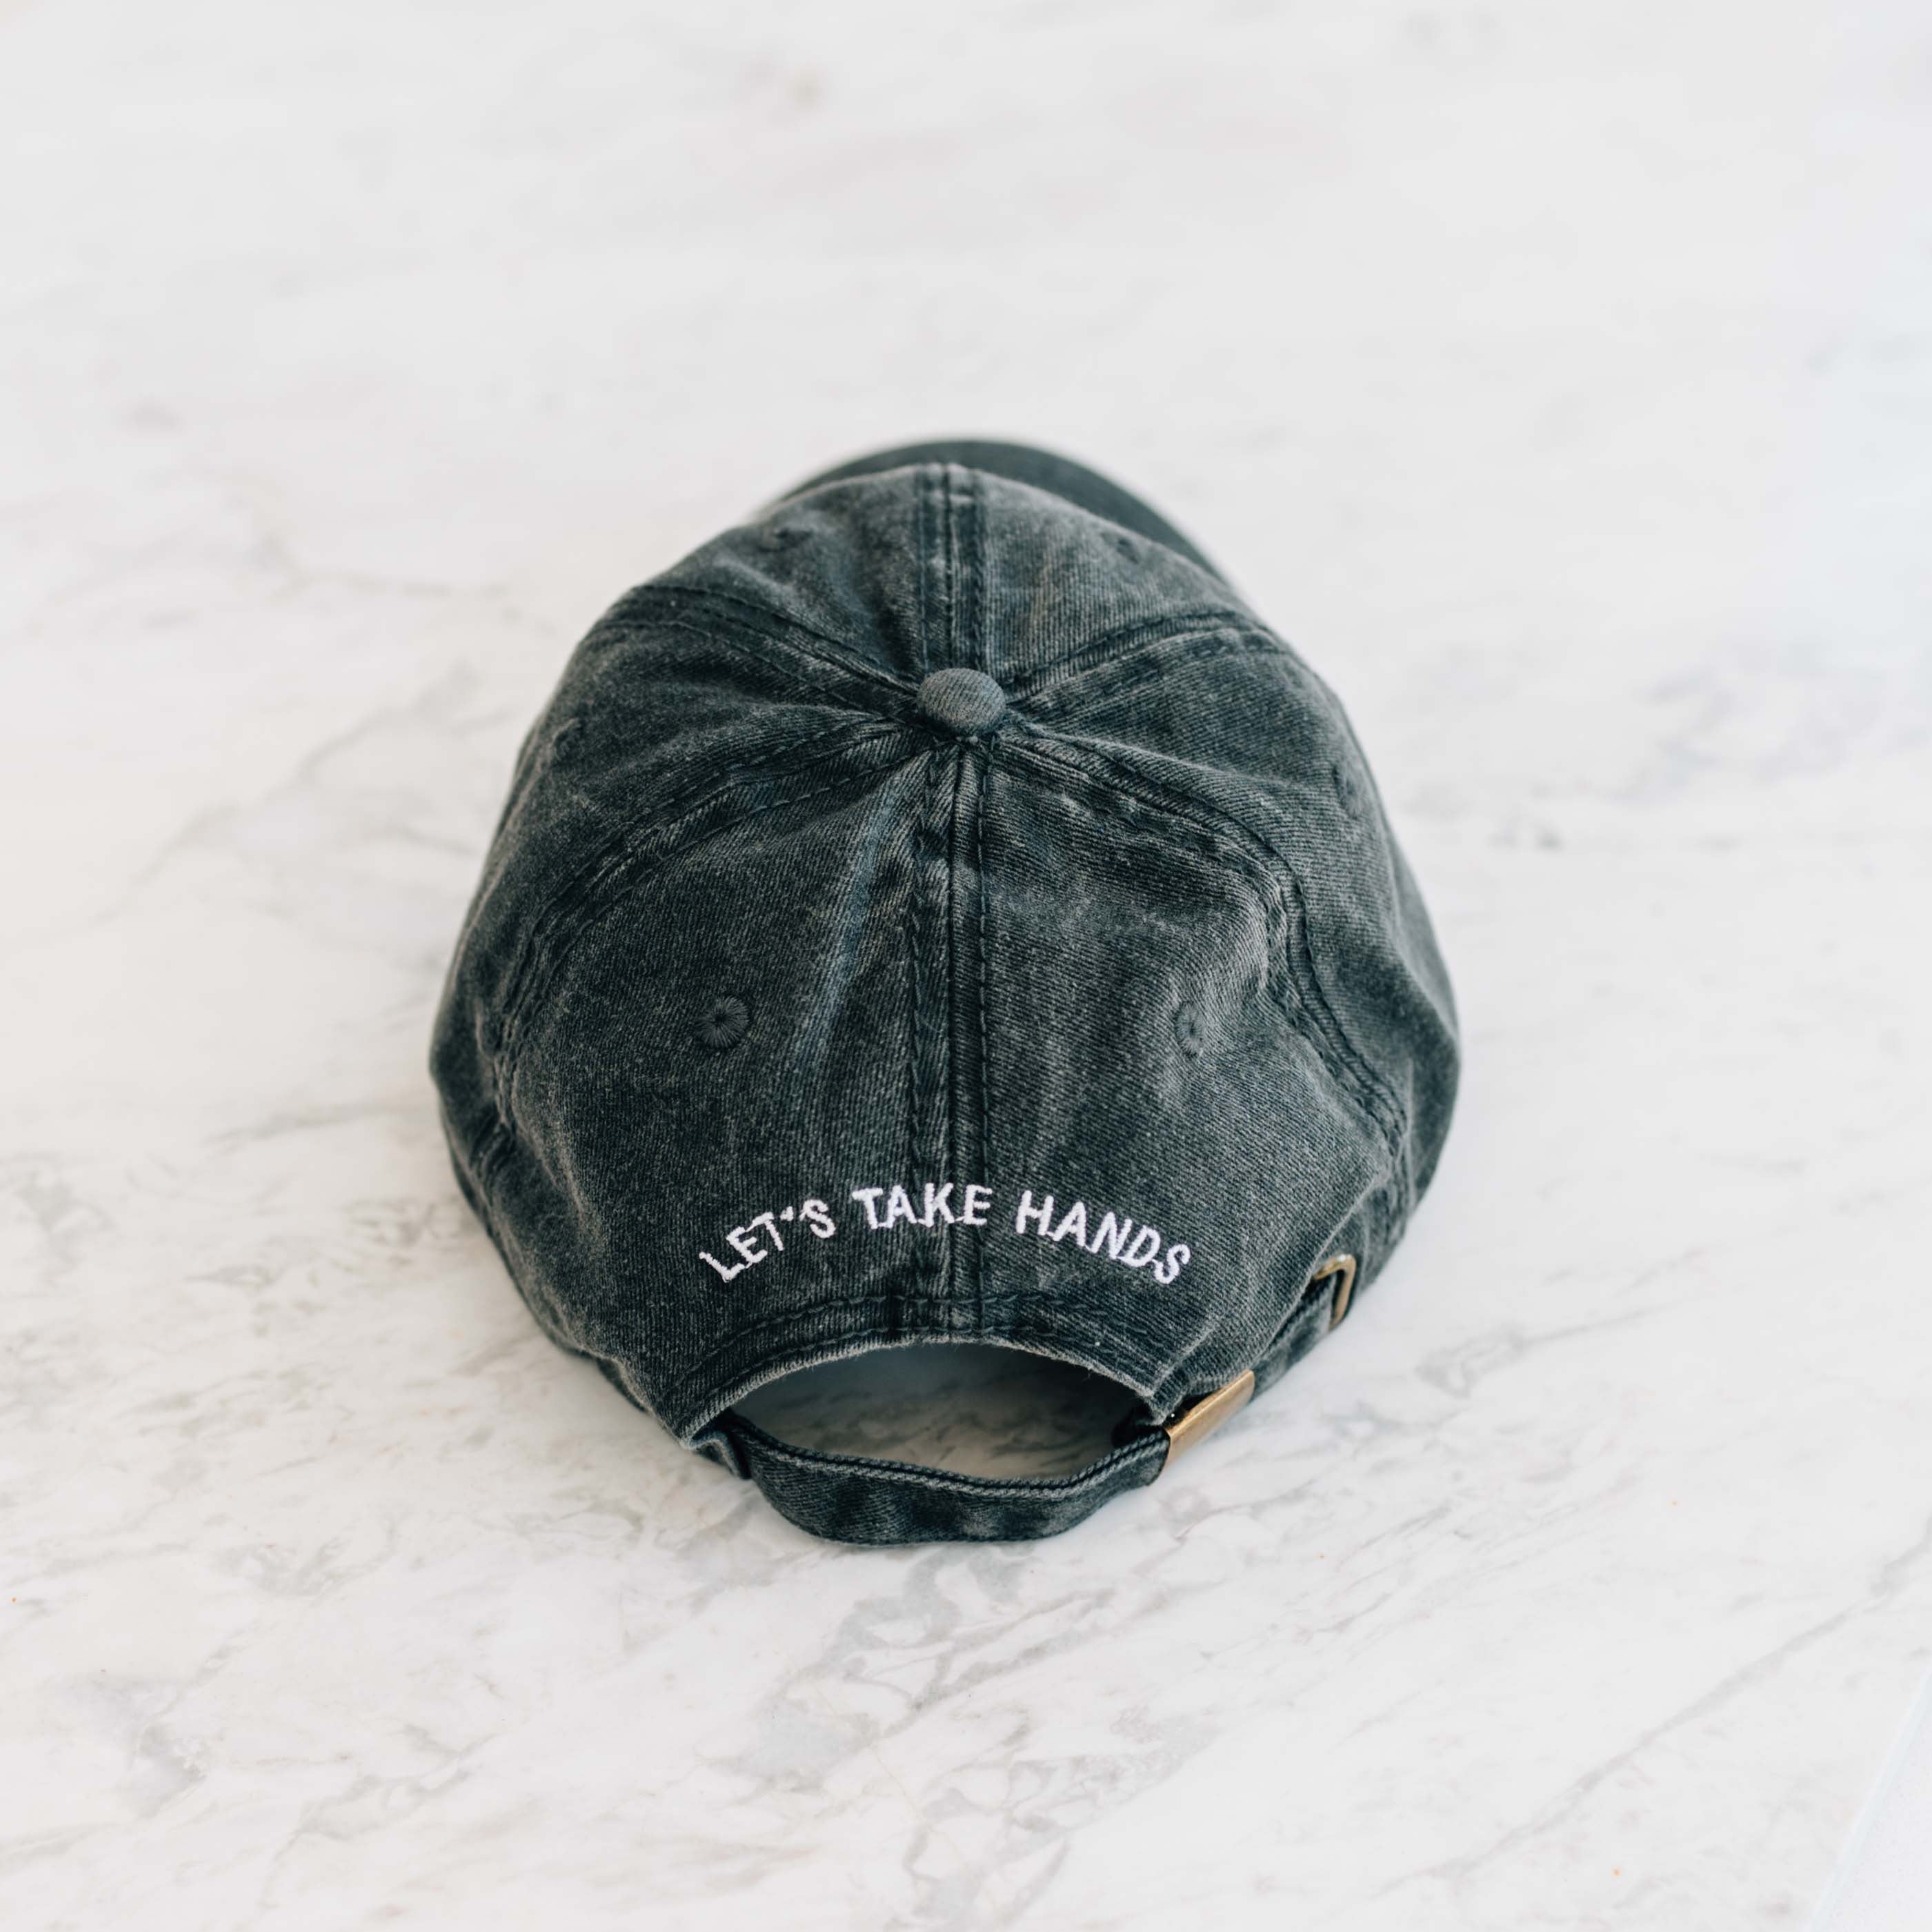 INANI • Charcoal Heritage Cap - Stokedthebrand. Lifestyle products for outdoor adventures. Made in South Africa